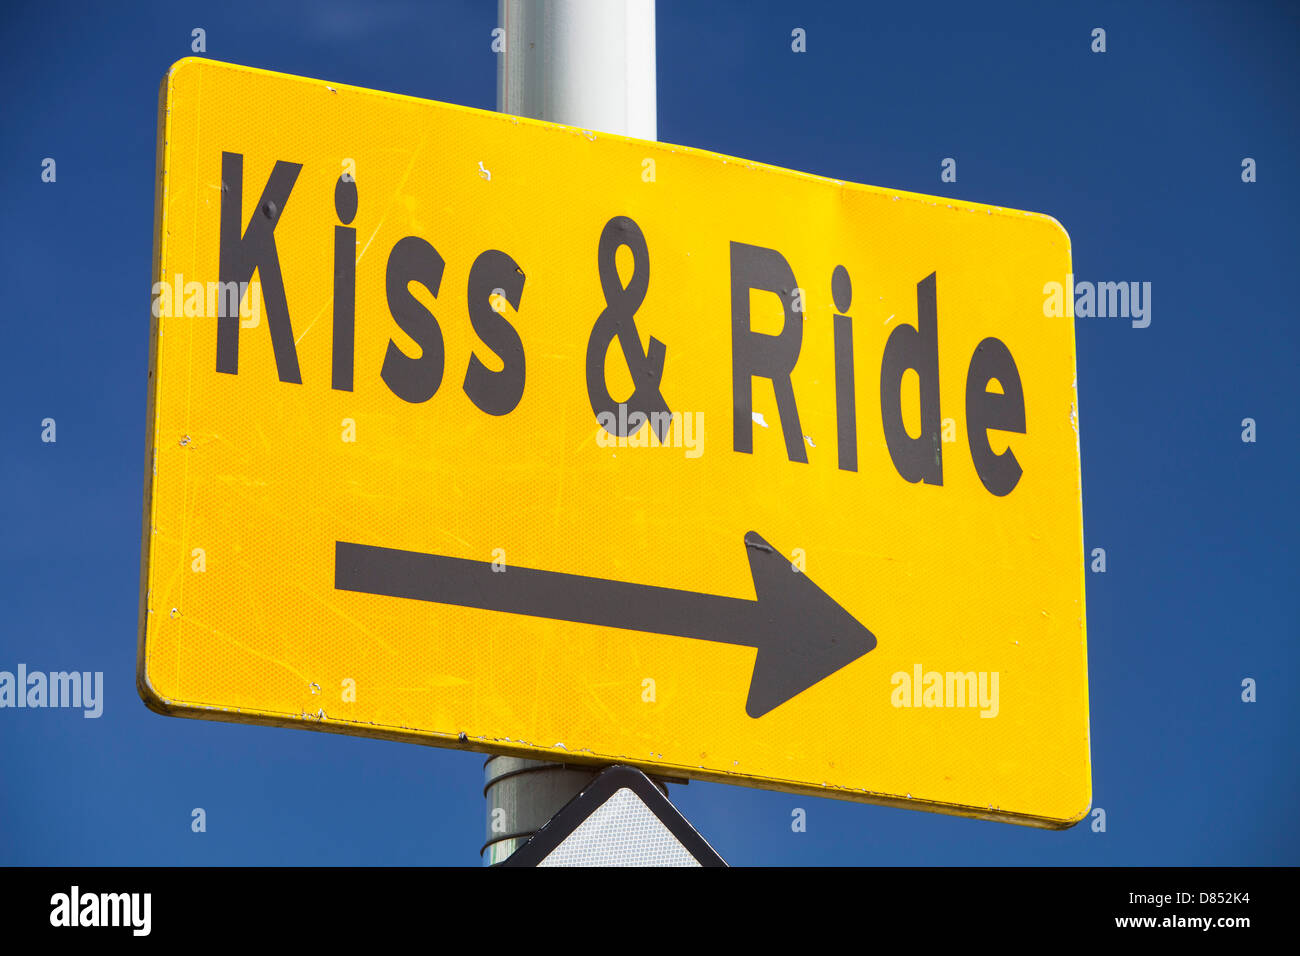 A Kiss and ride sign in Zaanstadt, Netherlands. Stock Photo